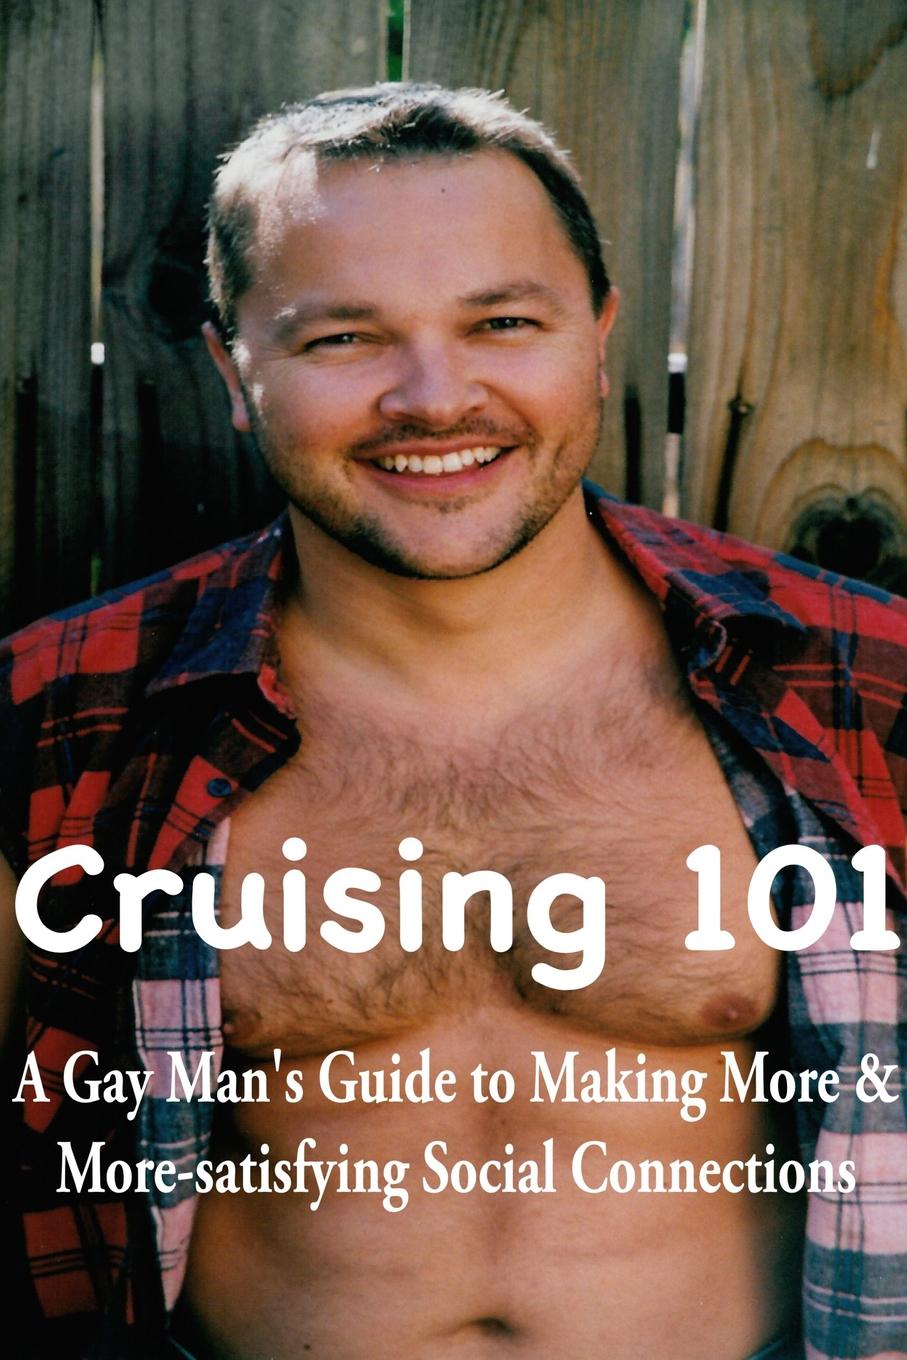 William Schindler Cruising 101. A Gay Man.s Guide to Making More and More-satisfying Social Connections